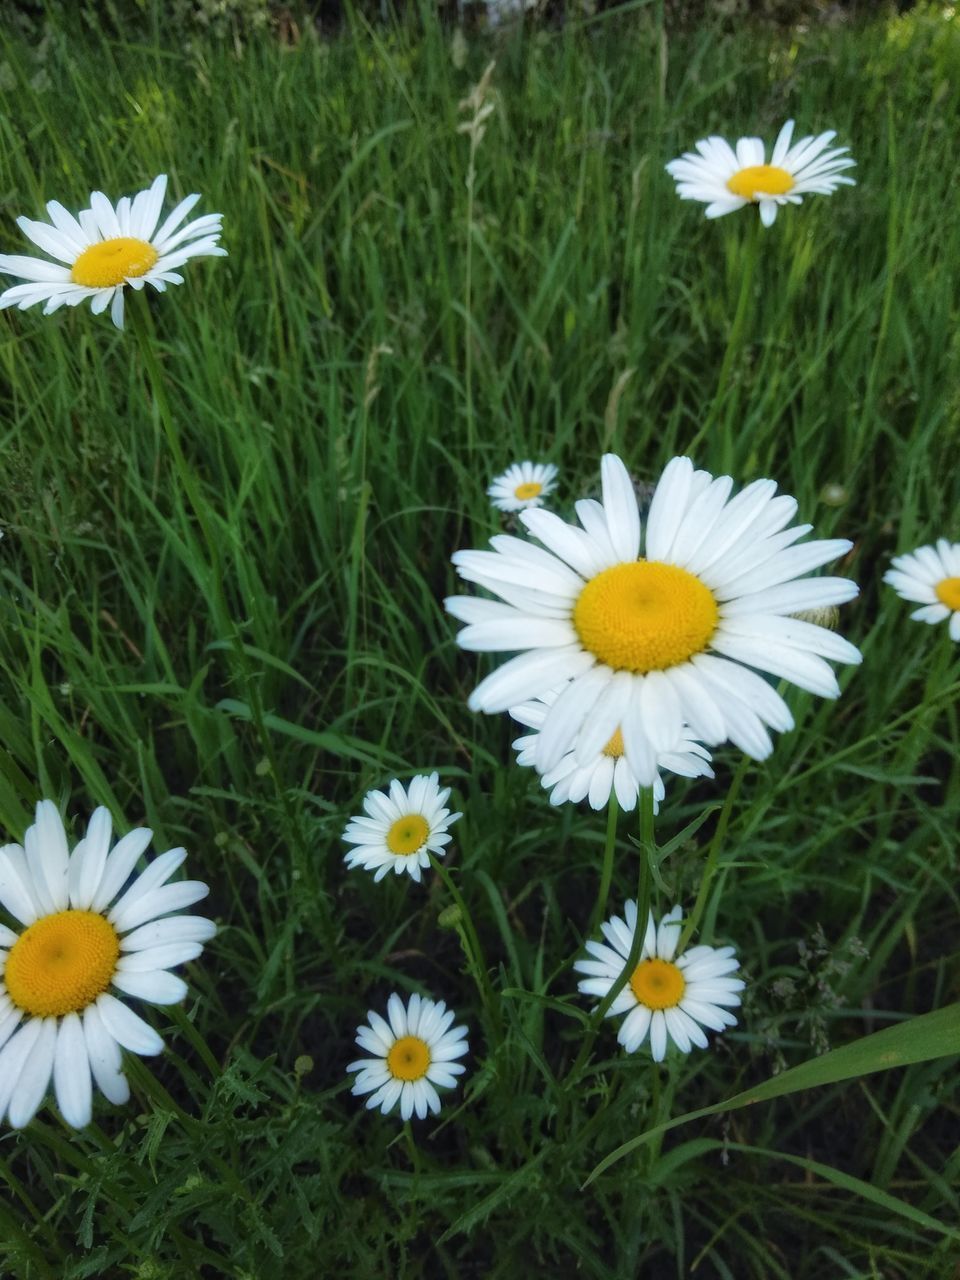 HIGH ANGLE VIEW OF WHITE DAISY FLOWERS